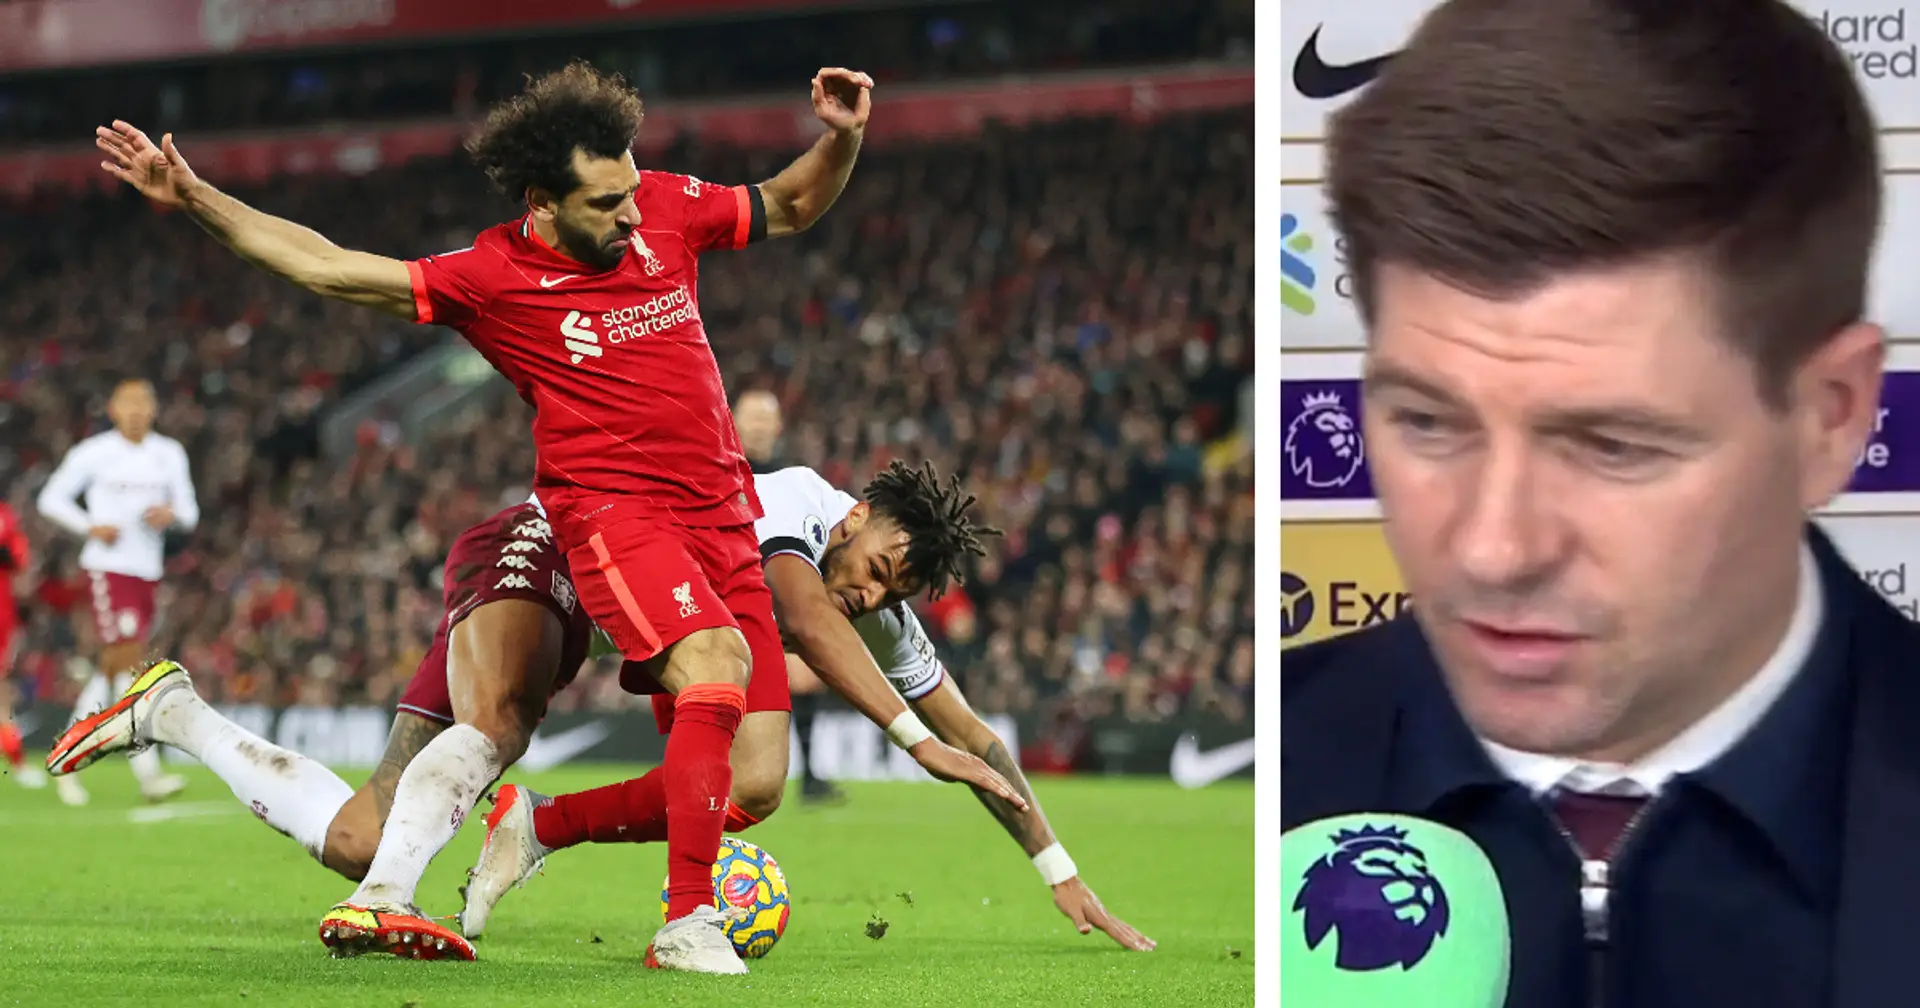 'Salah fouled first, it's disappointing': Gerrard claims Liverpool penalty decision was soft